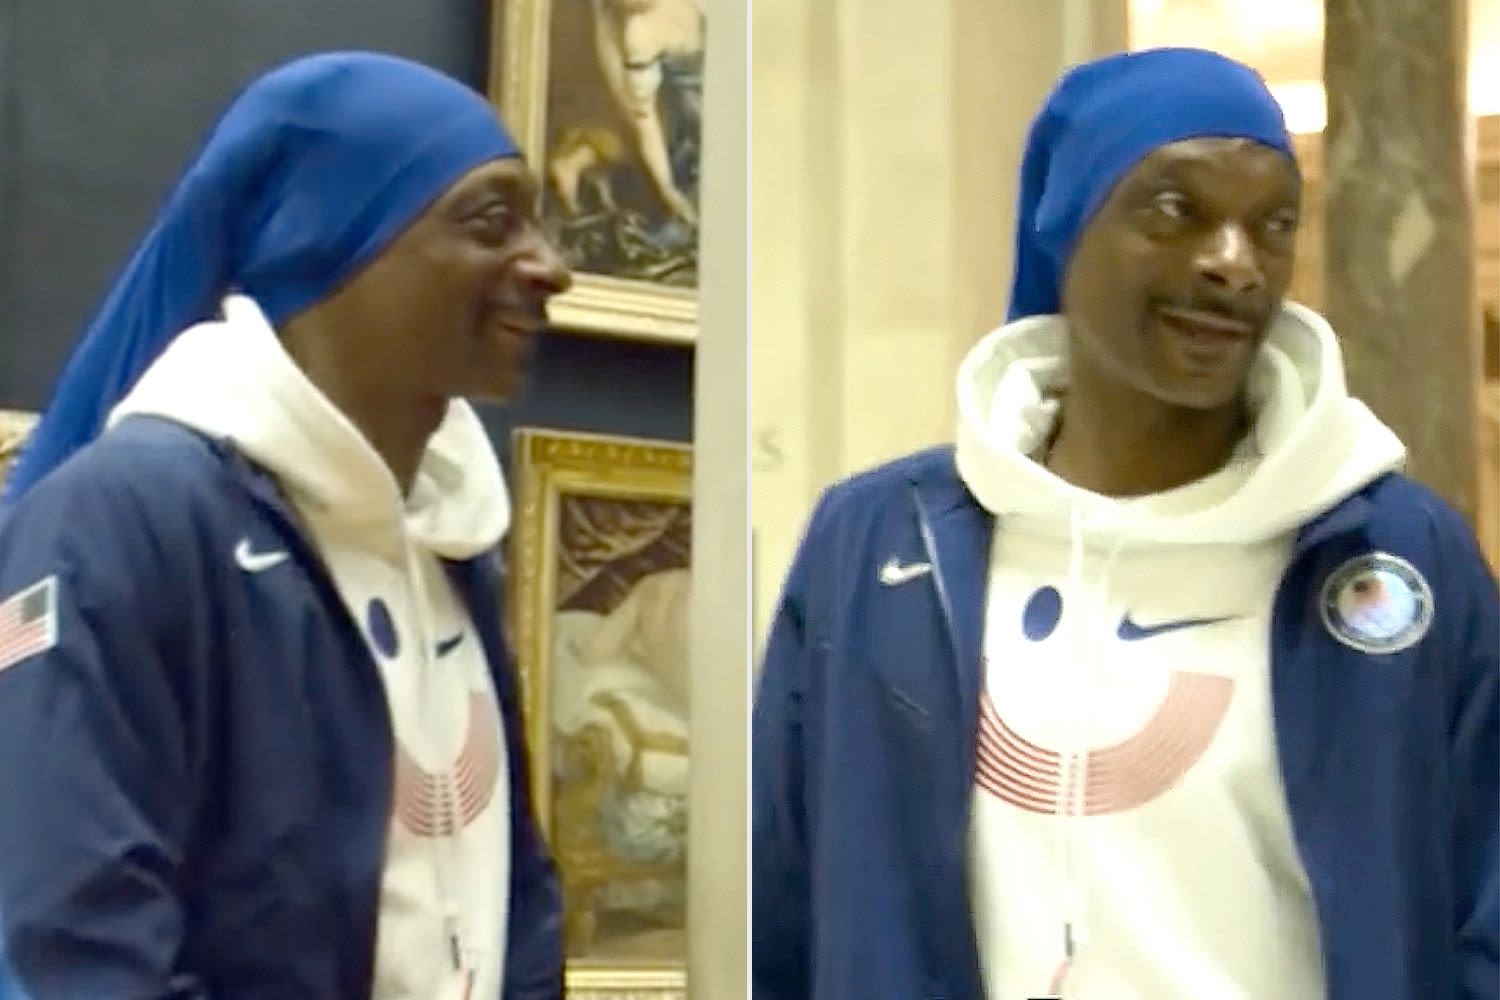 Snoop Dogg Takes Hilarious Private Tour of the Louvre During Paris Olympics: Watch